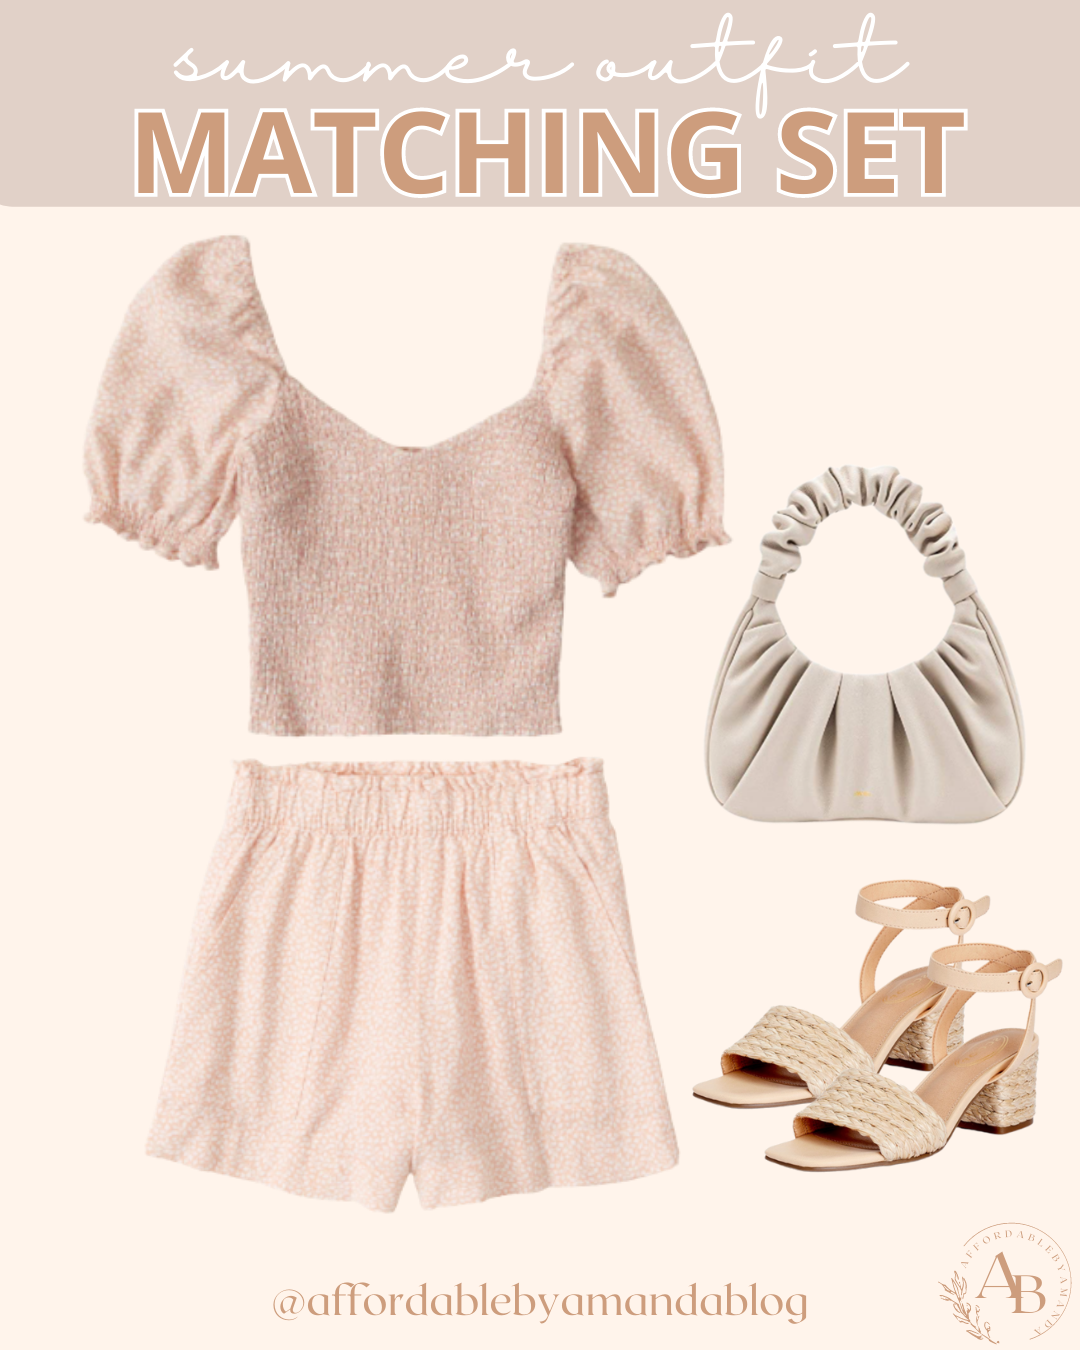 Matching Two-Piece Outfits & Sets You Need for Summer - Matching Sets: Two-Piece Outfits For Women This Summer - Affordable by Amanda